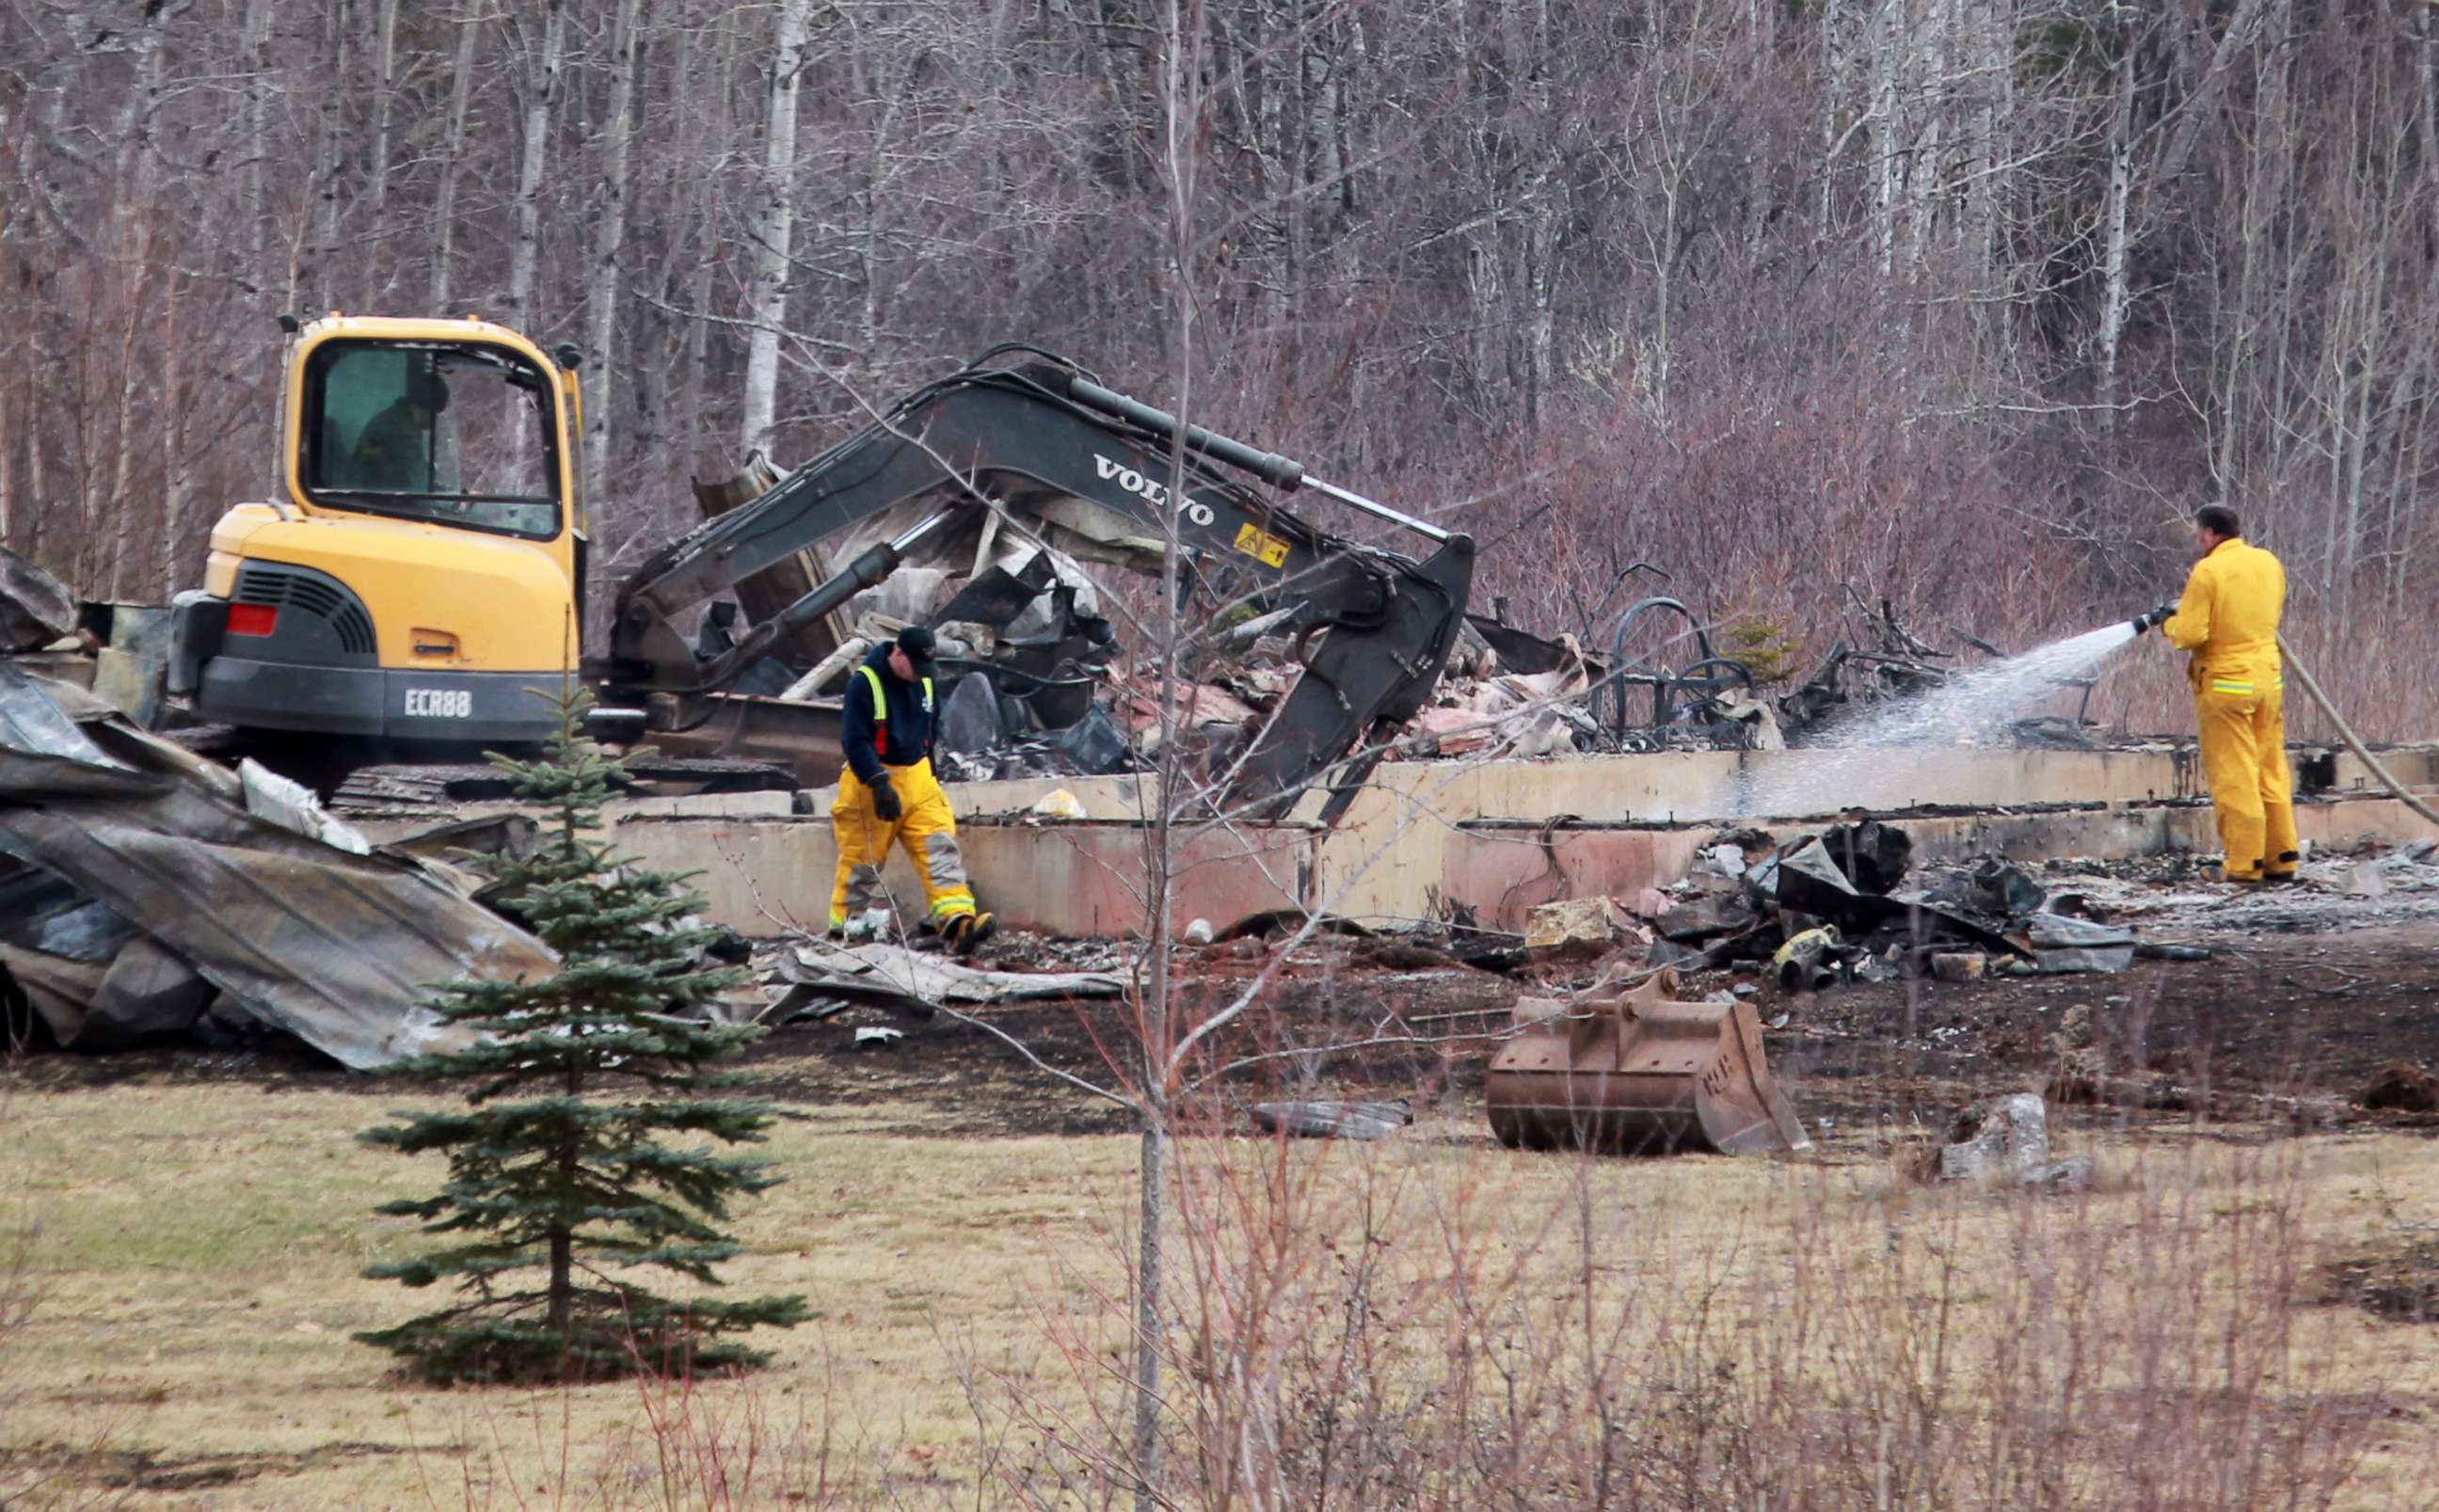 PHOTO: Wentworth volunteer firefighters douse hotspots as an excavator digs through the rubble of a destroyed home linked to Sunday's deadly shooting rampage on April 20, 2020 in Wentworth Centre, Nova Scotia, Canada. 